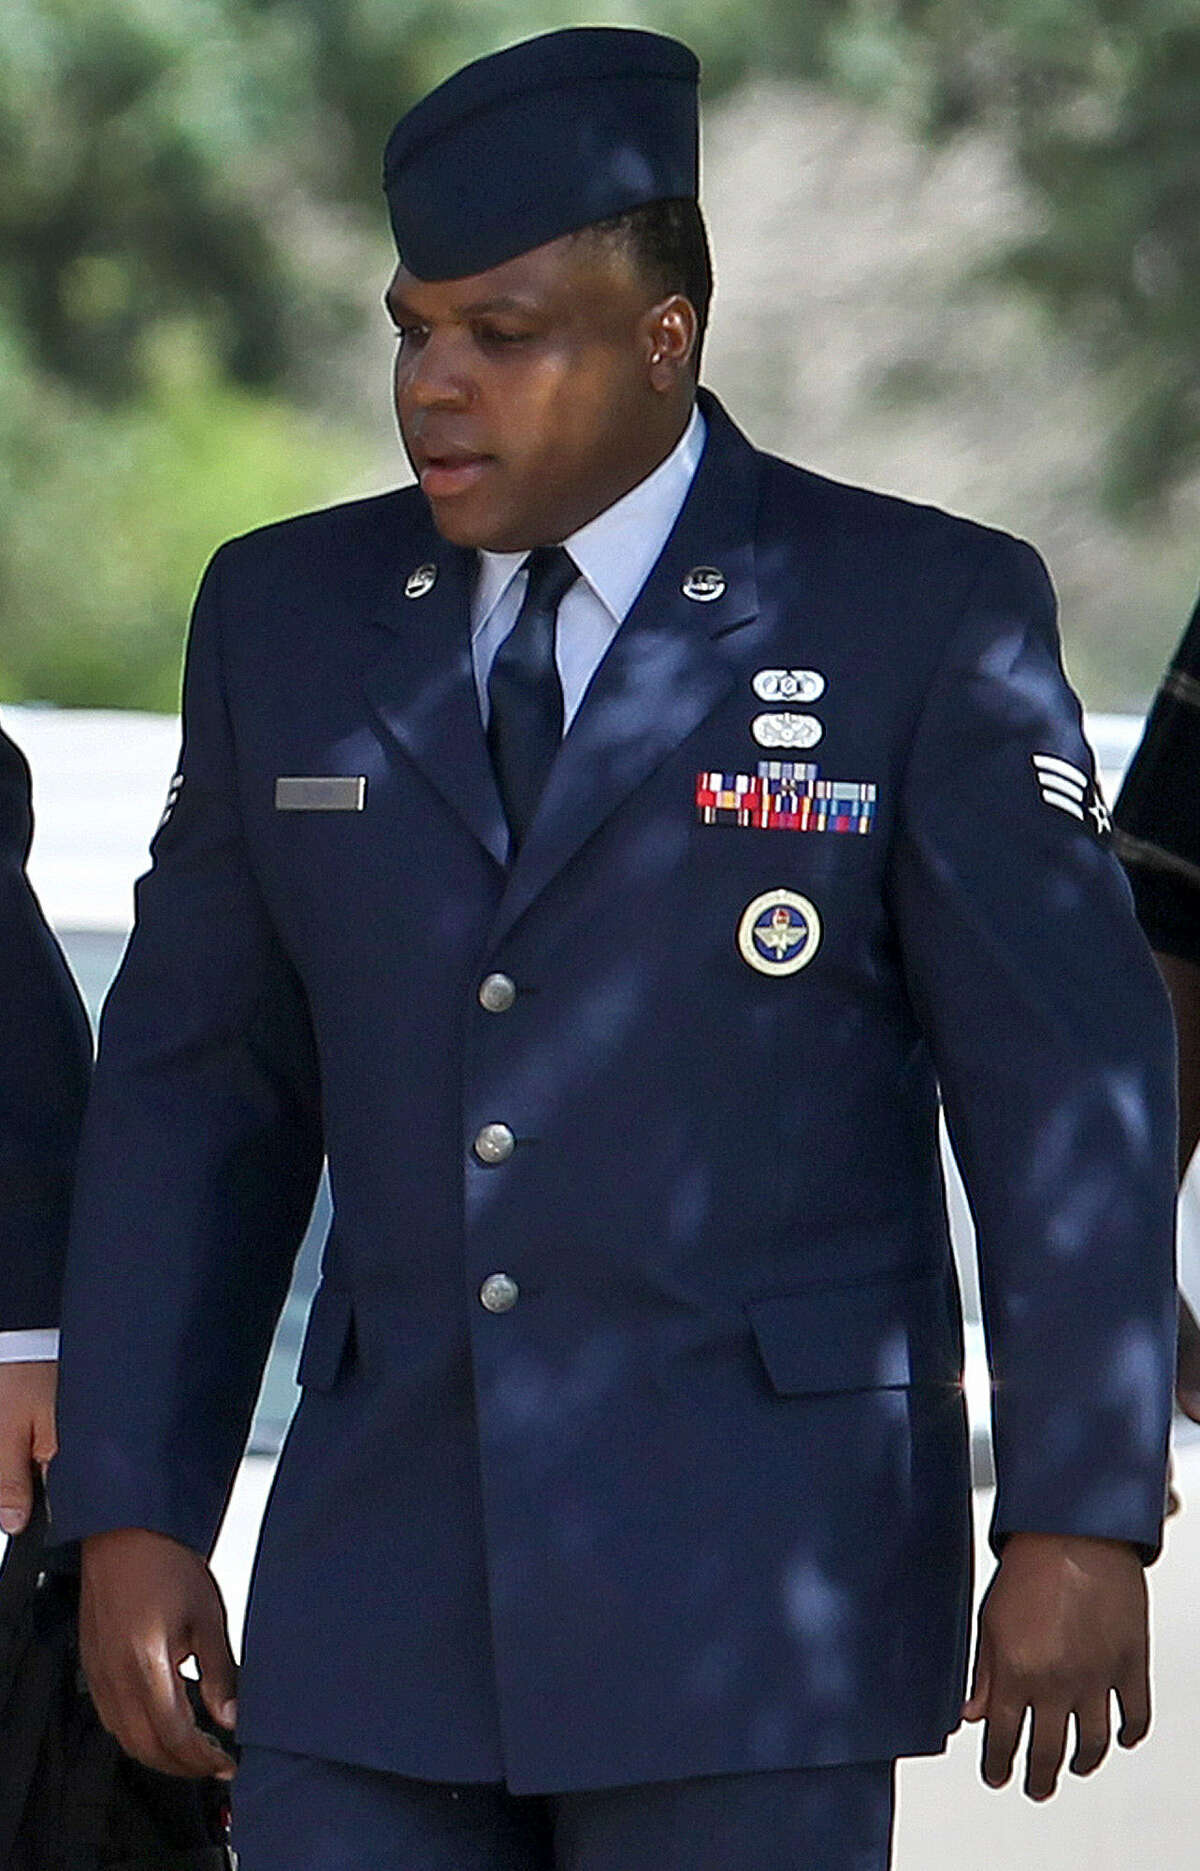 The case against Senior Airman Christopher Oliver hinges on the believability of the woman who testified against him and is identified as Victim 3.